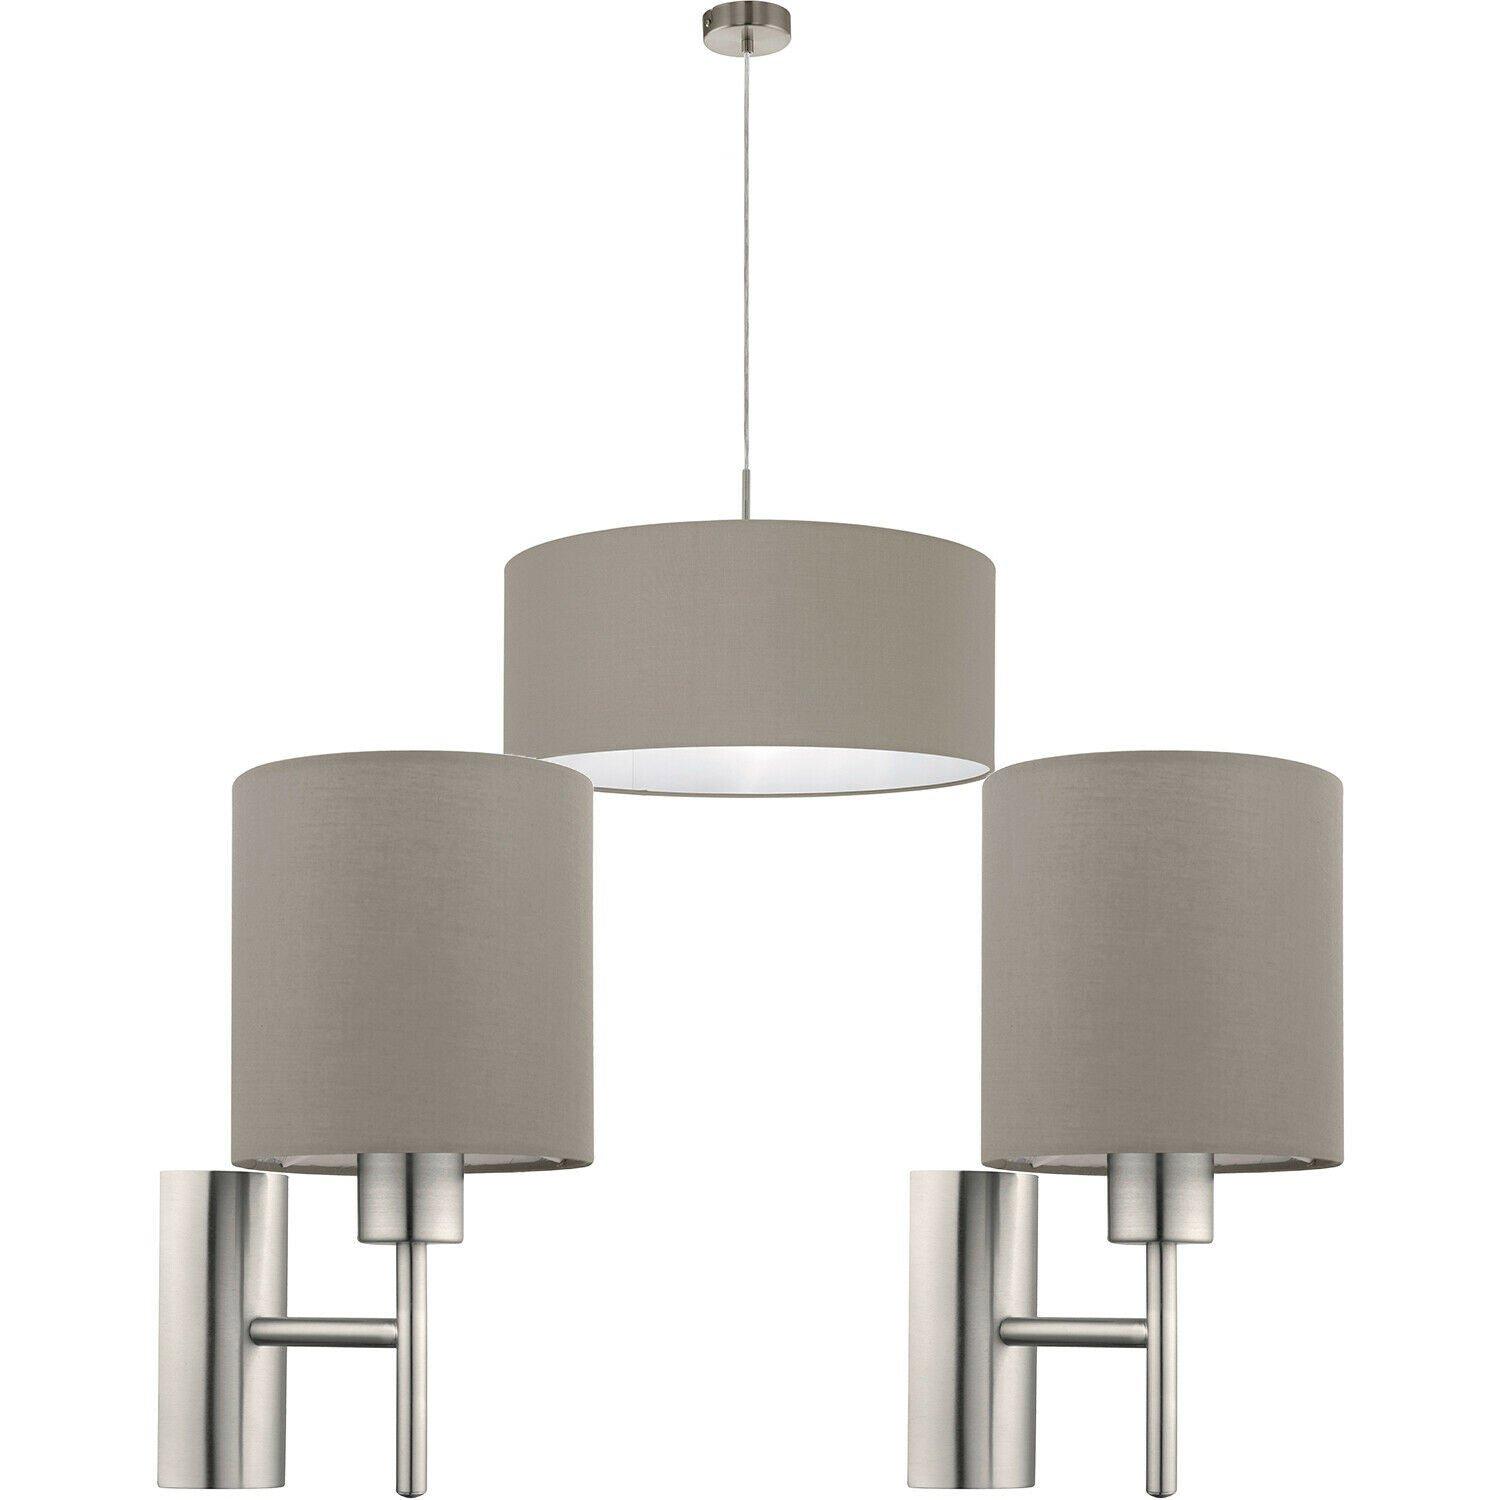 Ceiling Pendant Light & 2x Matching Wall Lights Satin Nickel Taupe Fabric Shade